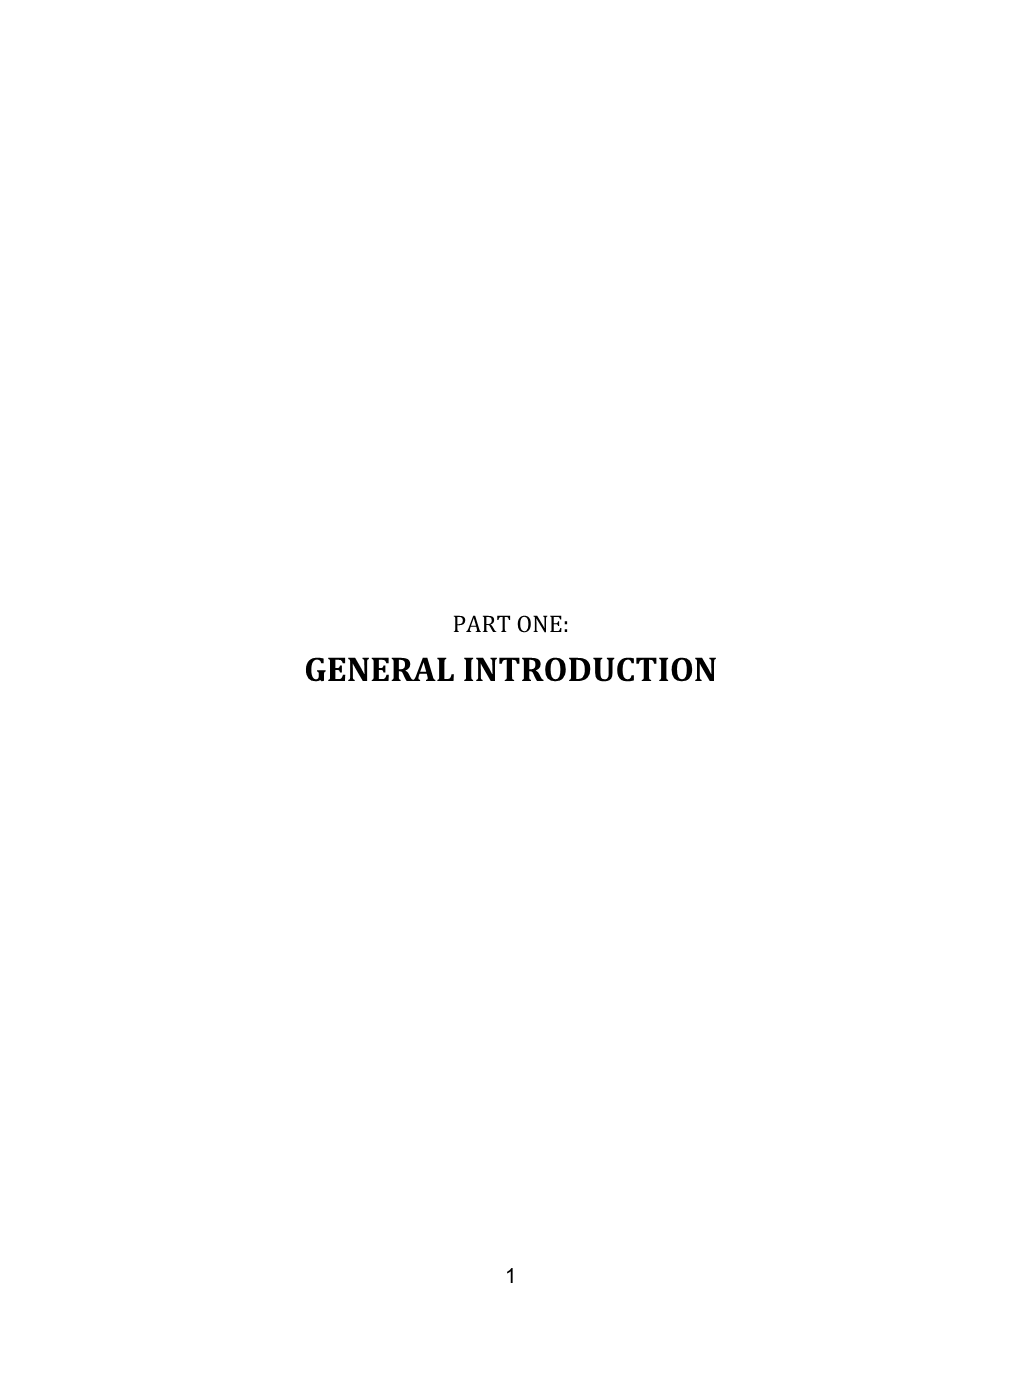 General Introduction